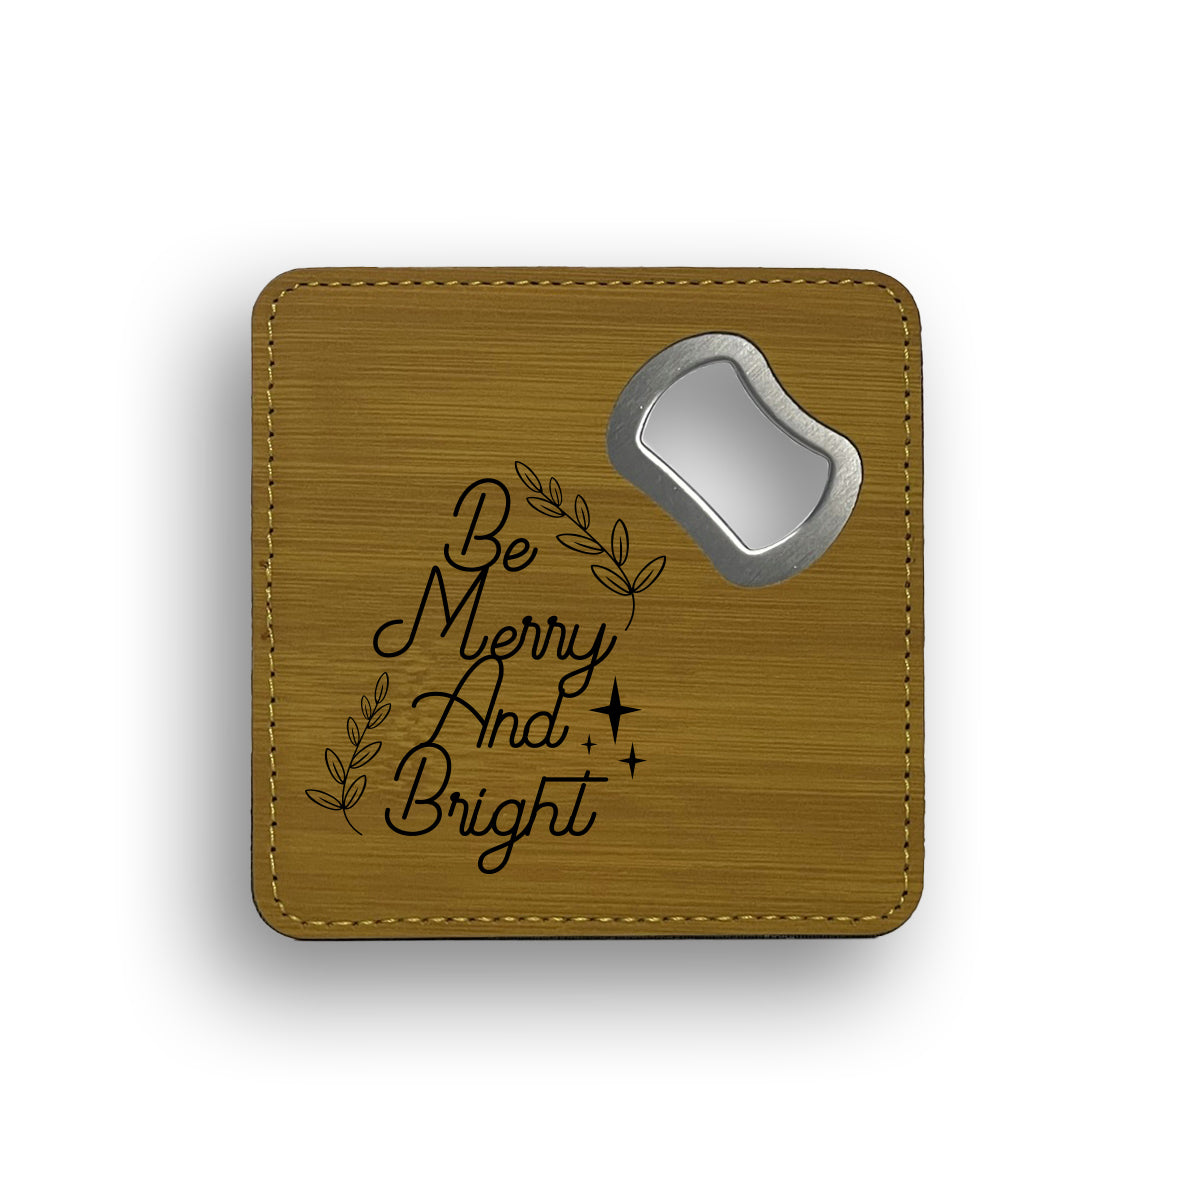 Be Merry And Bright Bottle Opener Coaster